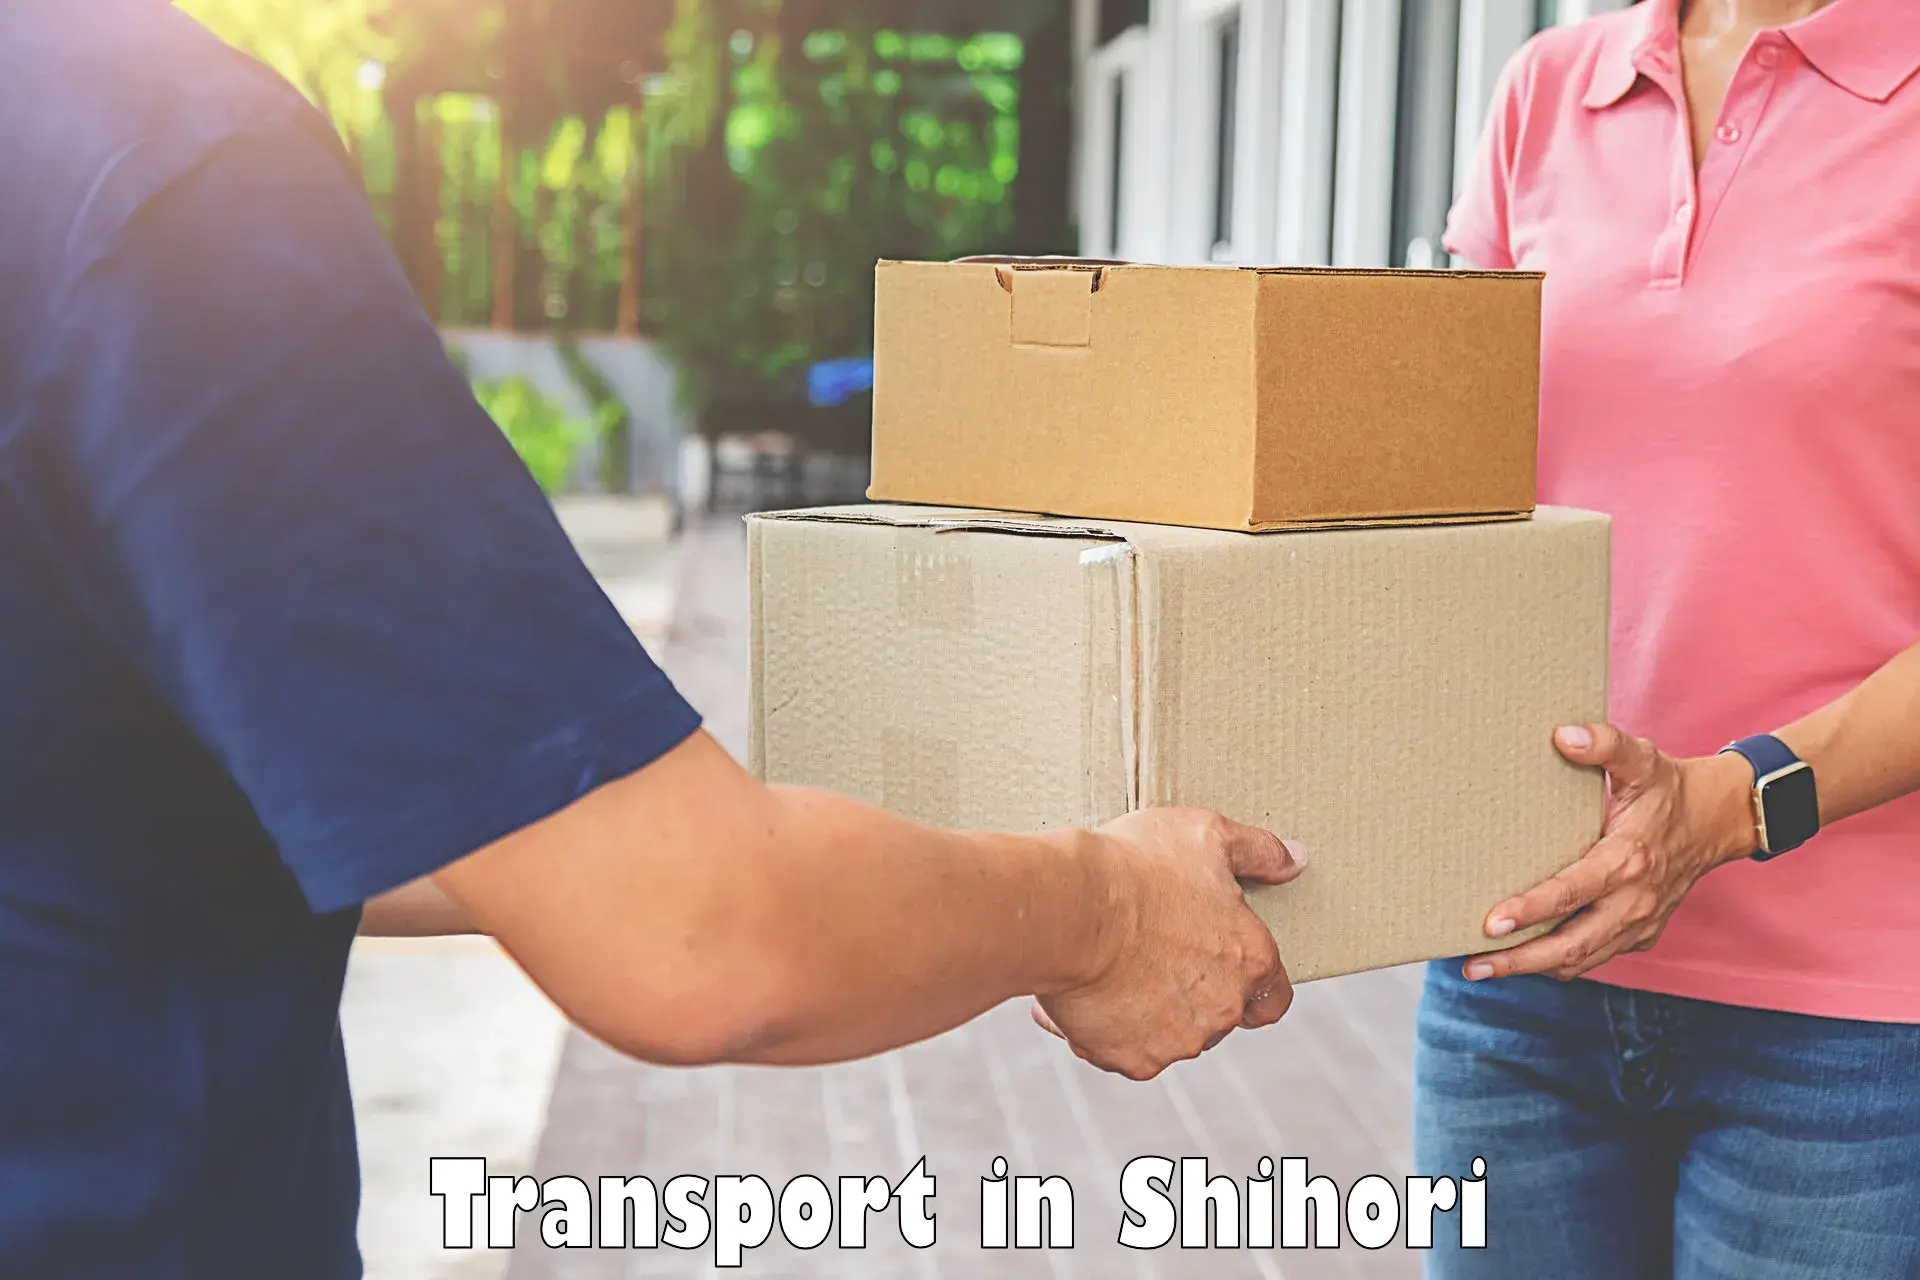 Daily transport service in Shihori